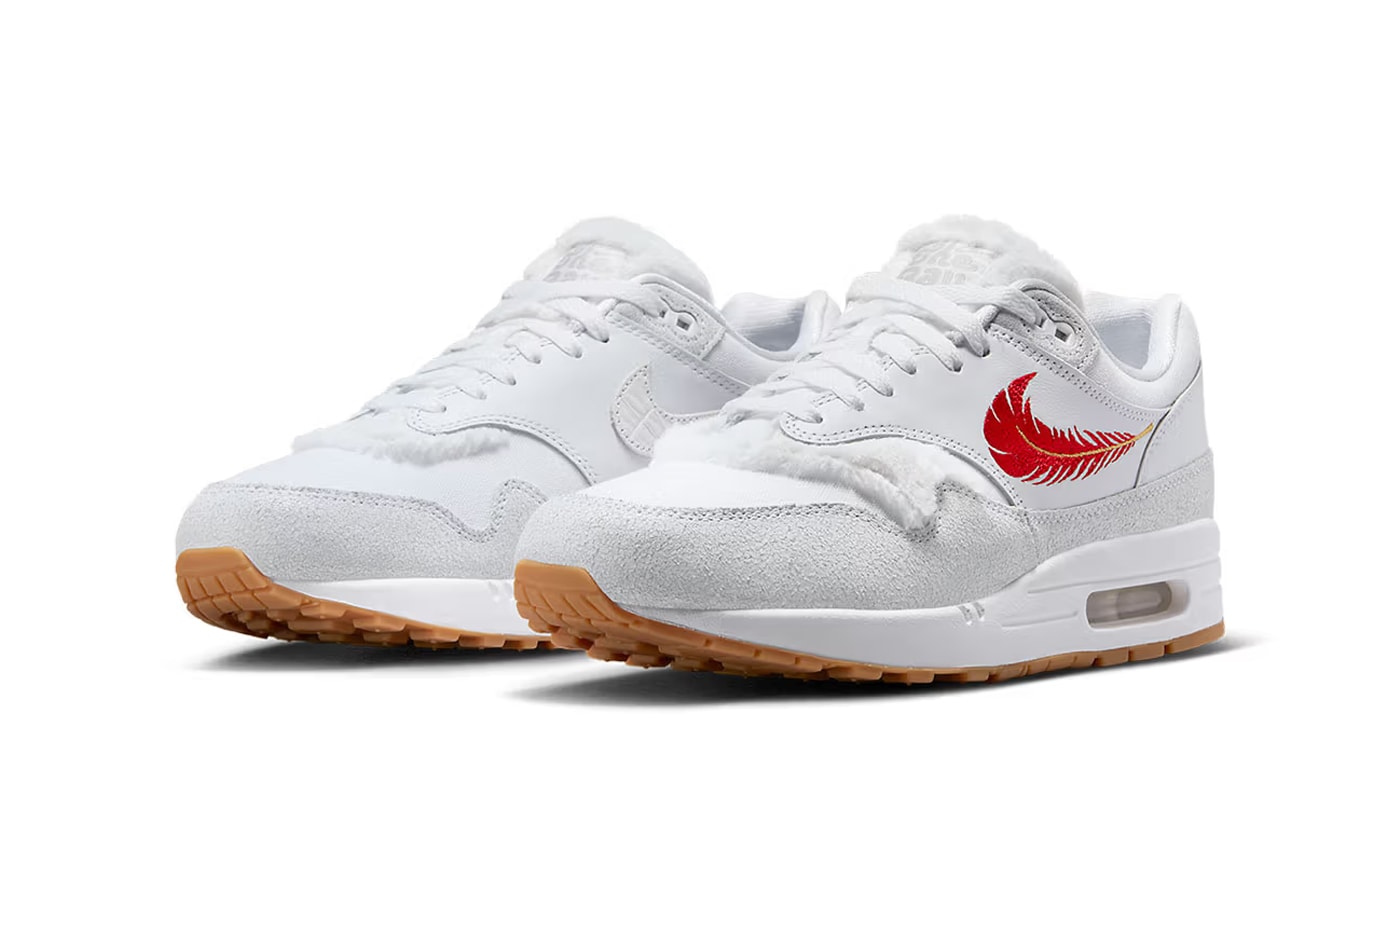 nike air max 1 the bay FJ4451 100 release date info store list buying guide photos price 